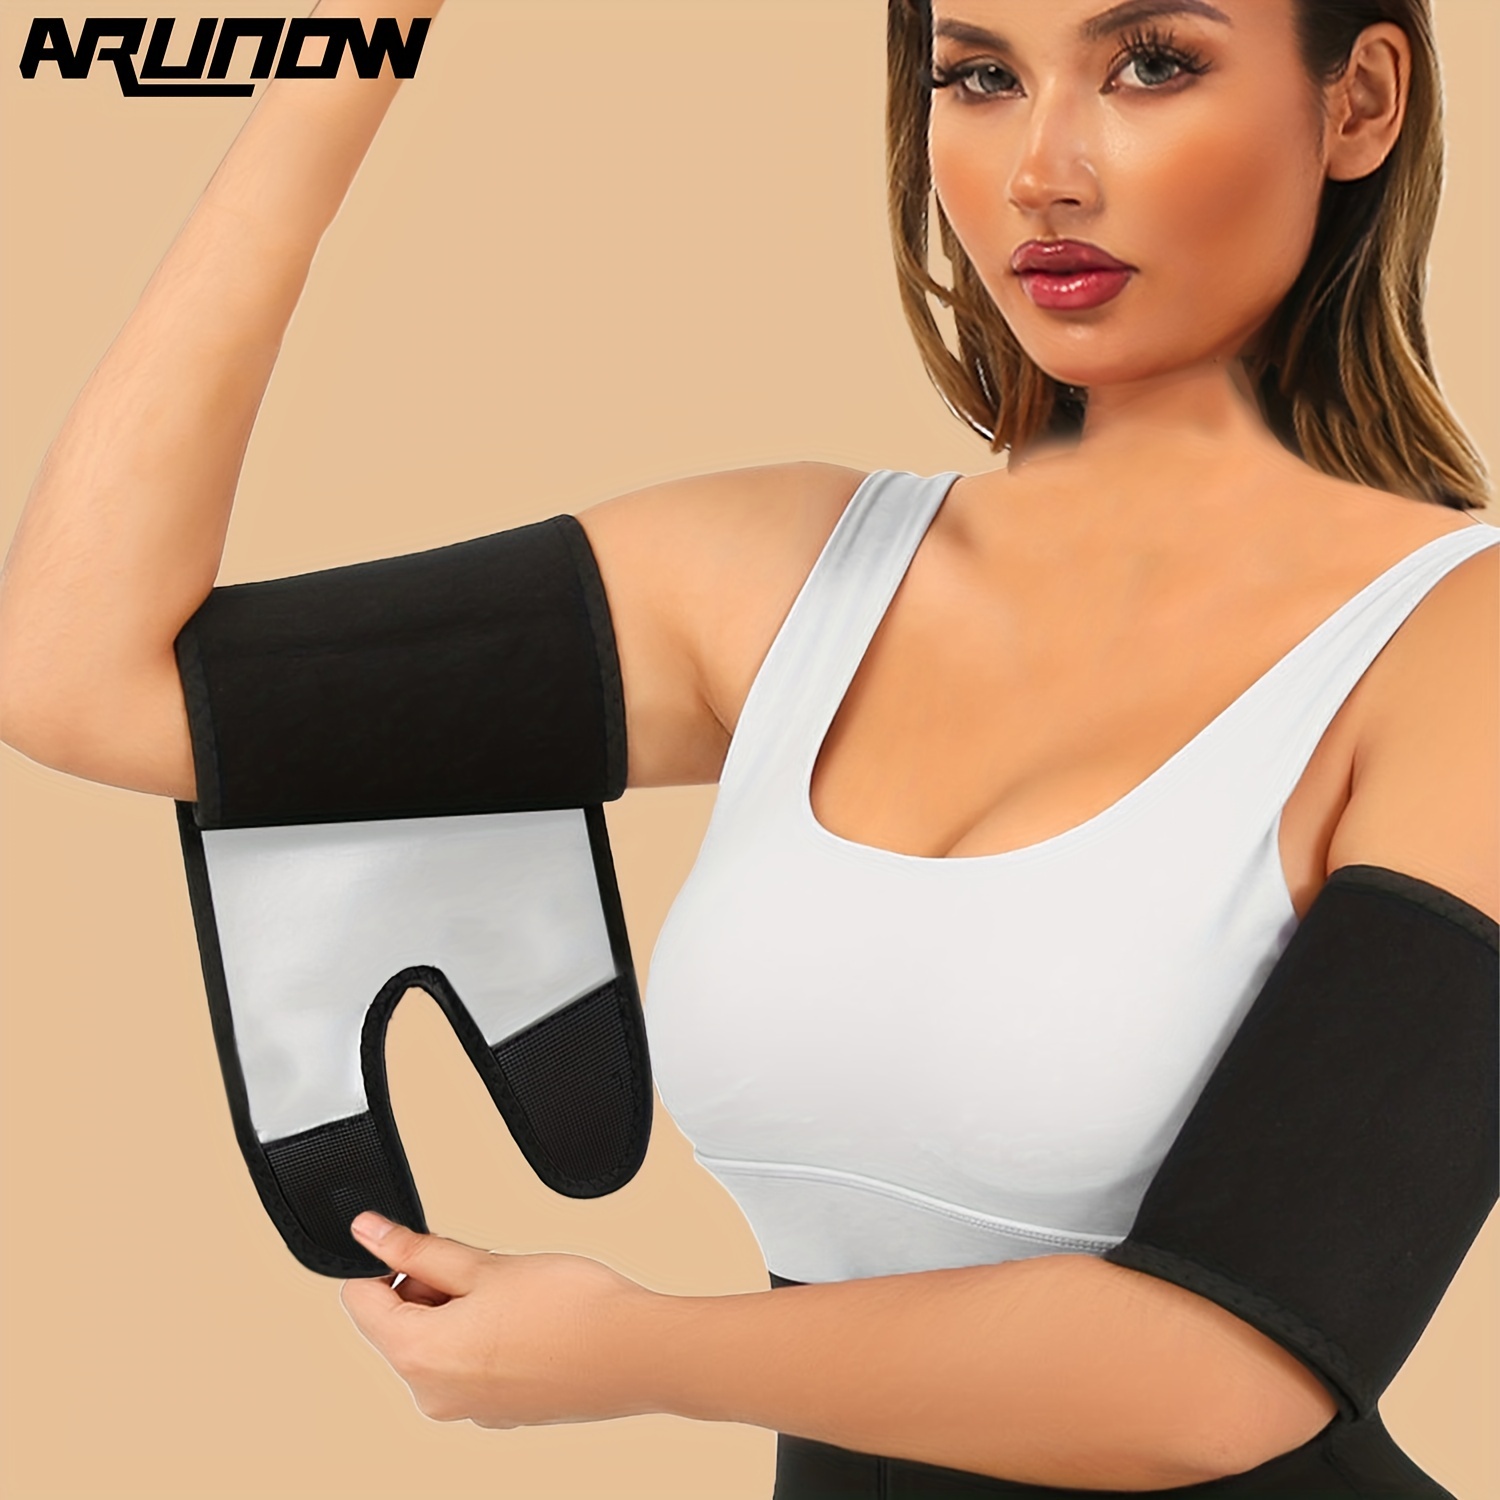 Arm Trimmers Wrap Body Shaper Sauna Sweat Bands Weight Loss